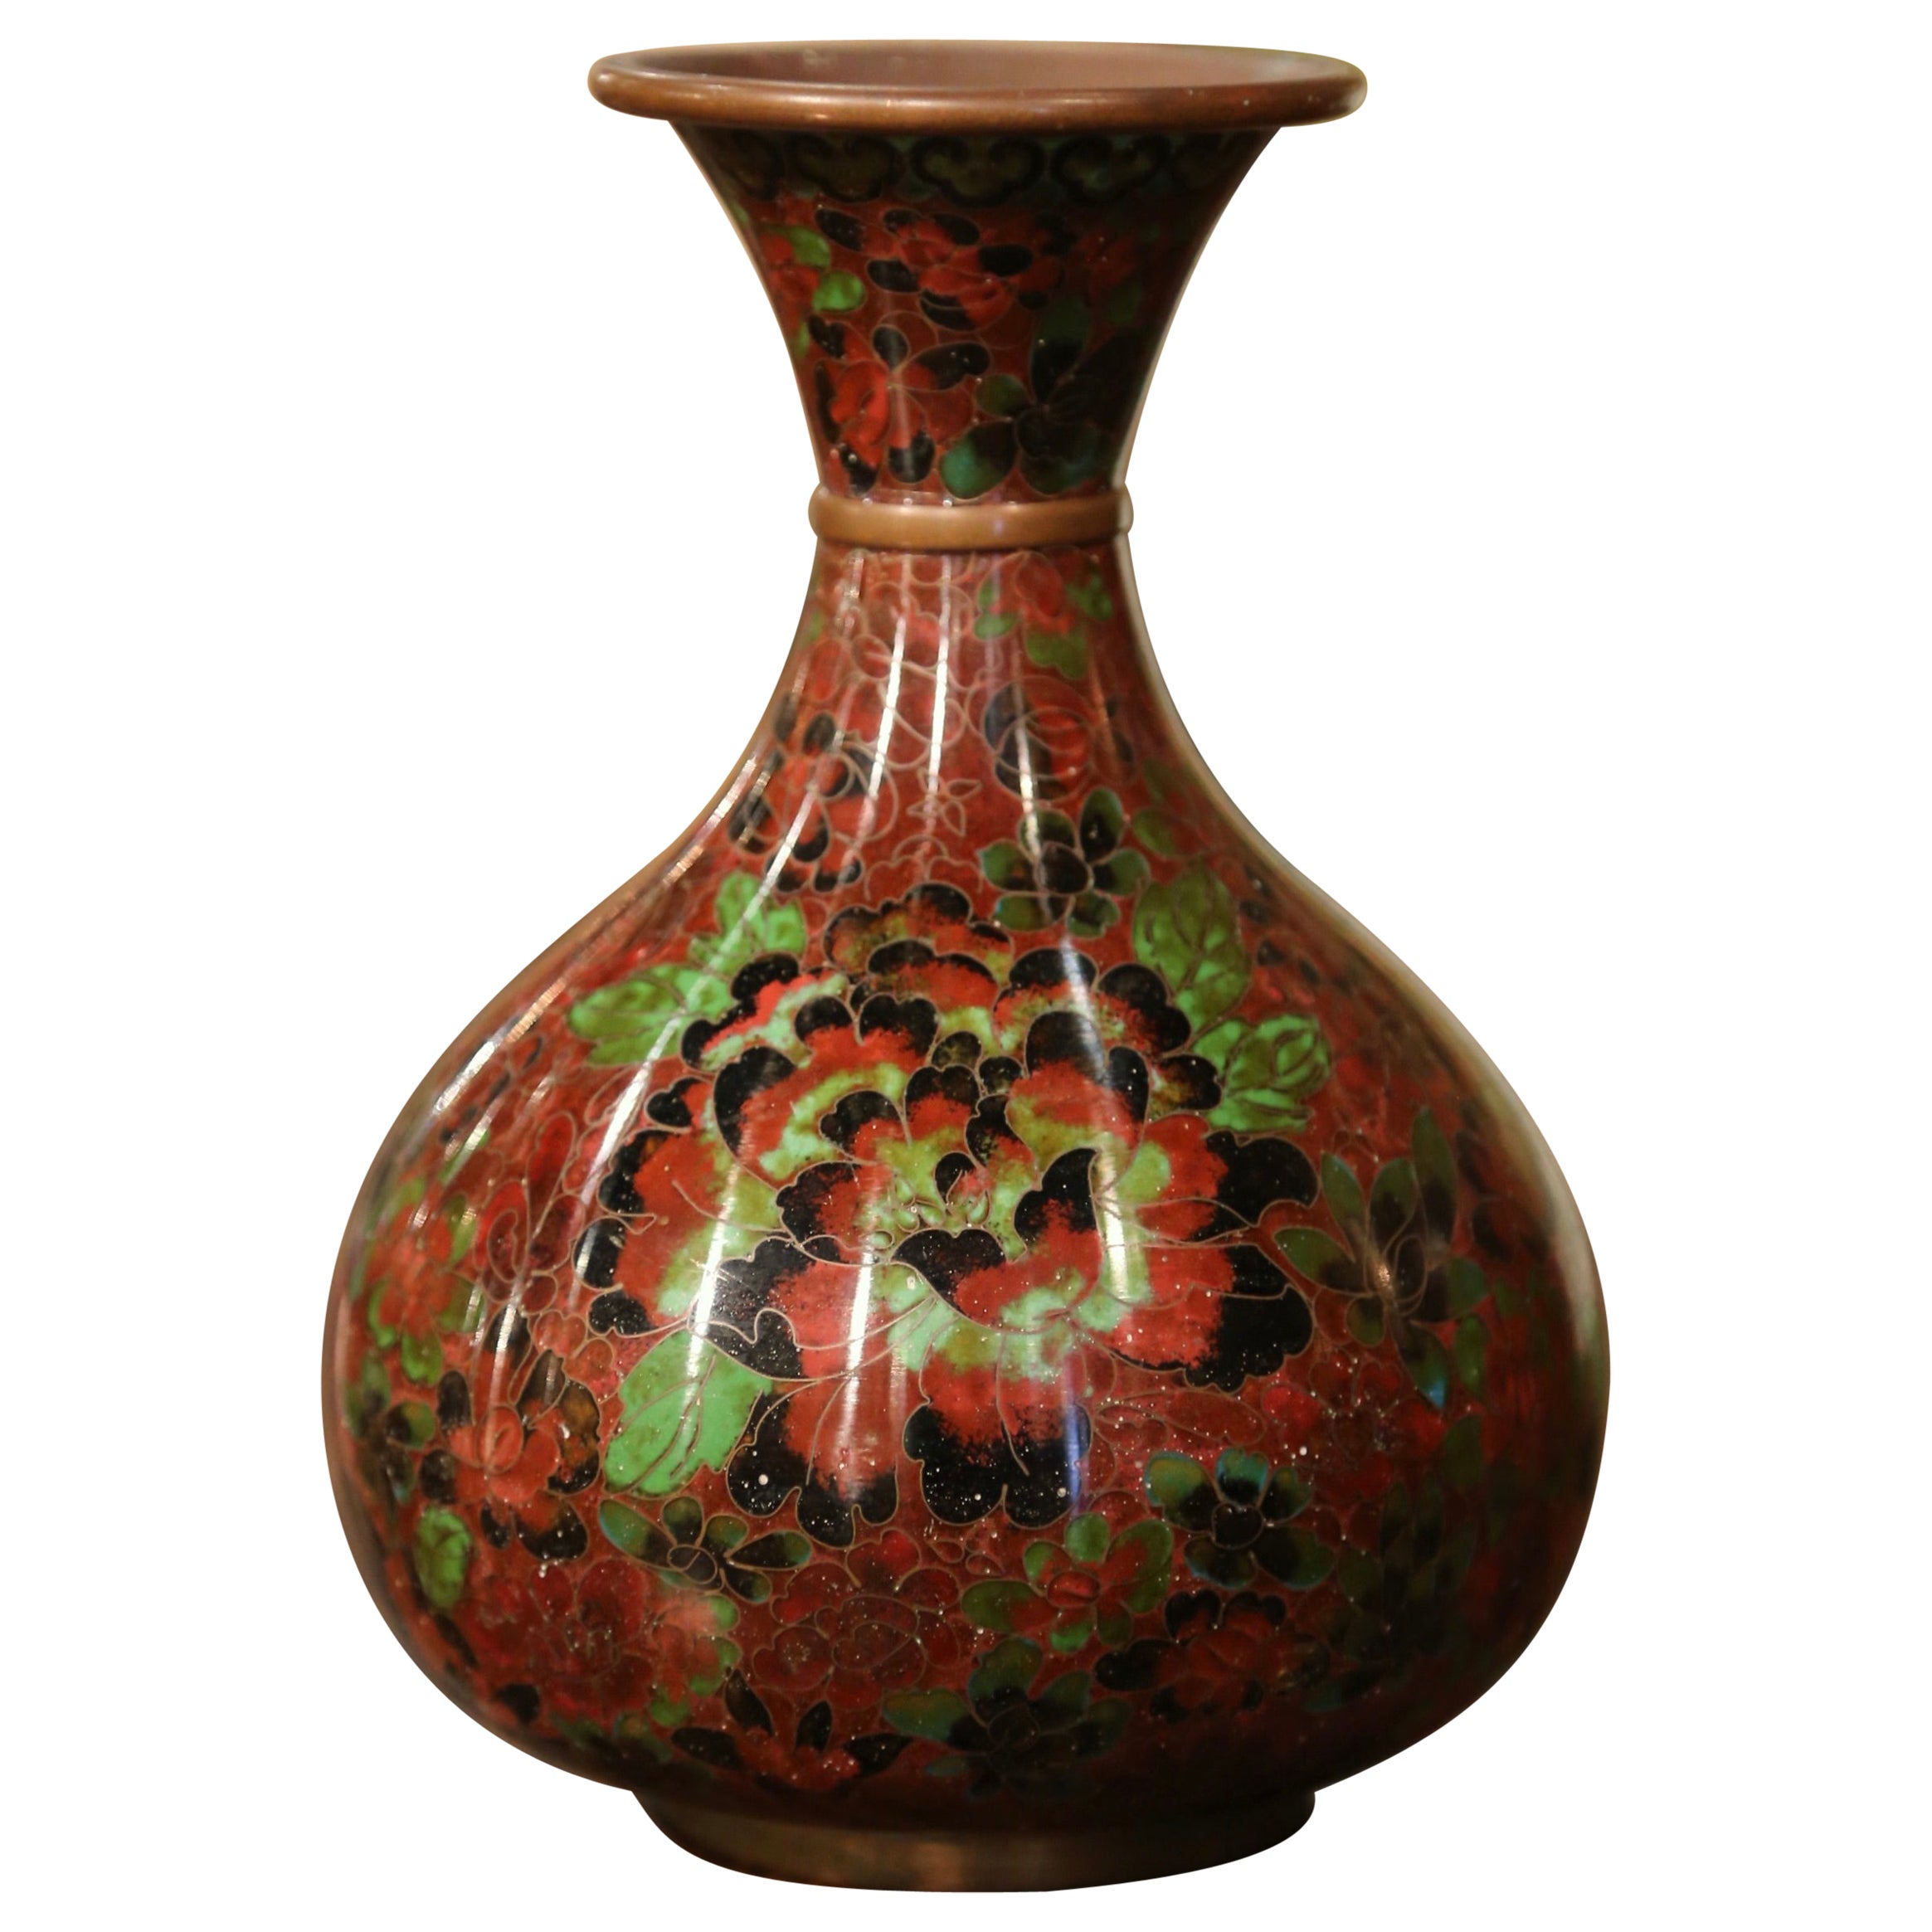 Vintage Chinese Cloisonne Enamel Vase with Floral Motifs on Wooden Stand For Sale